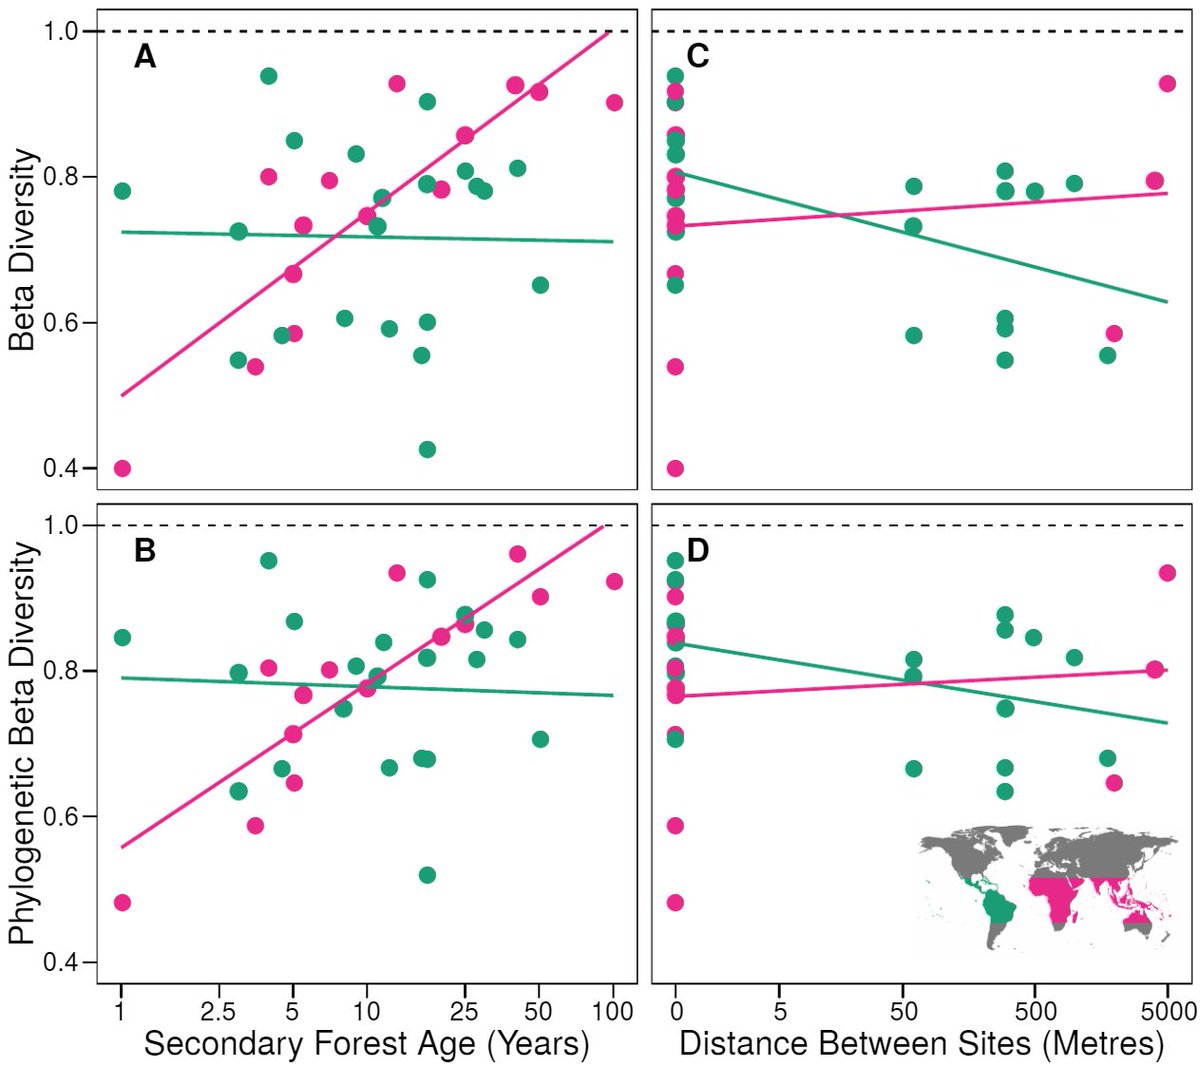 In addition, as the distance between sites increased both species and phylogenetic similarity between primary and sescondary forests was reduced - but only for New World sites, not Old World sites. (4/8)